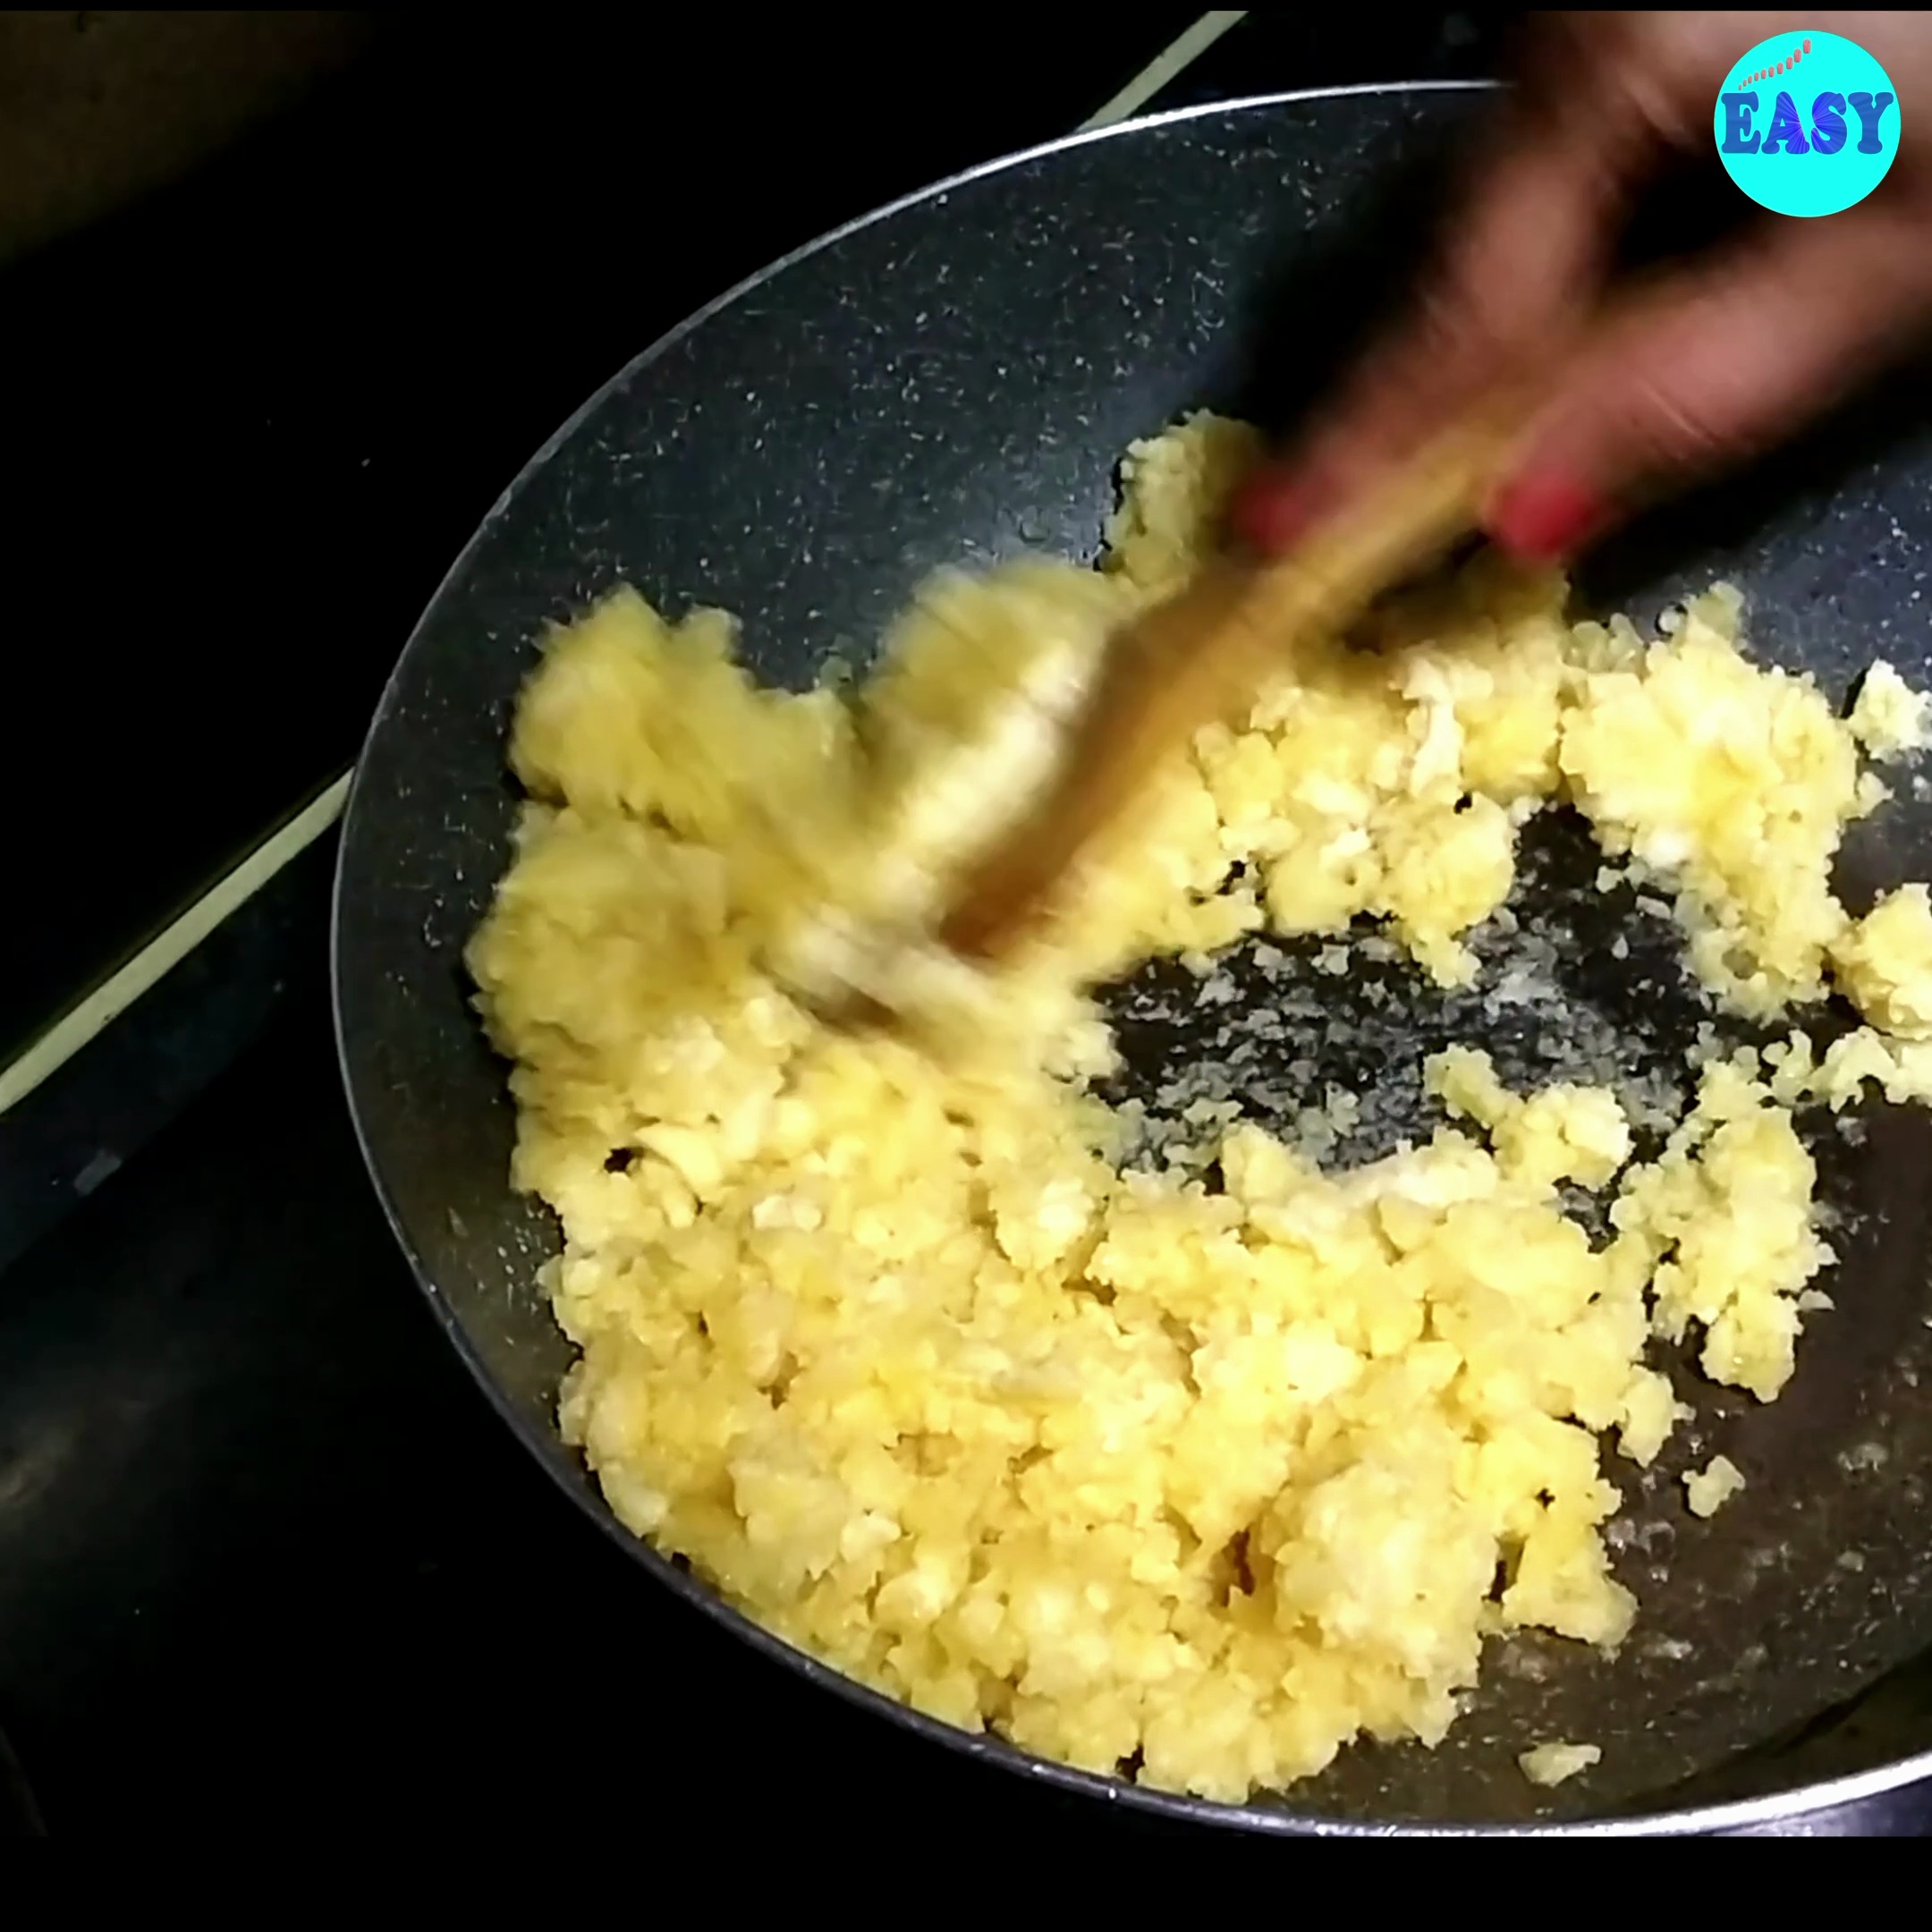 Step 7 - Cook the moong dal paste on low to medium heat, stirring continuously to prevent it from sticking to the bottom of the pan. This process will take some time (around15-25 minutes) as you need to cook the dal until it changes color to a golden brown and emits a pleasant aroma.